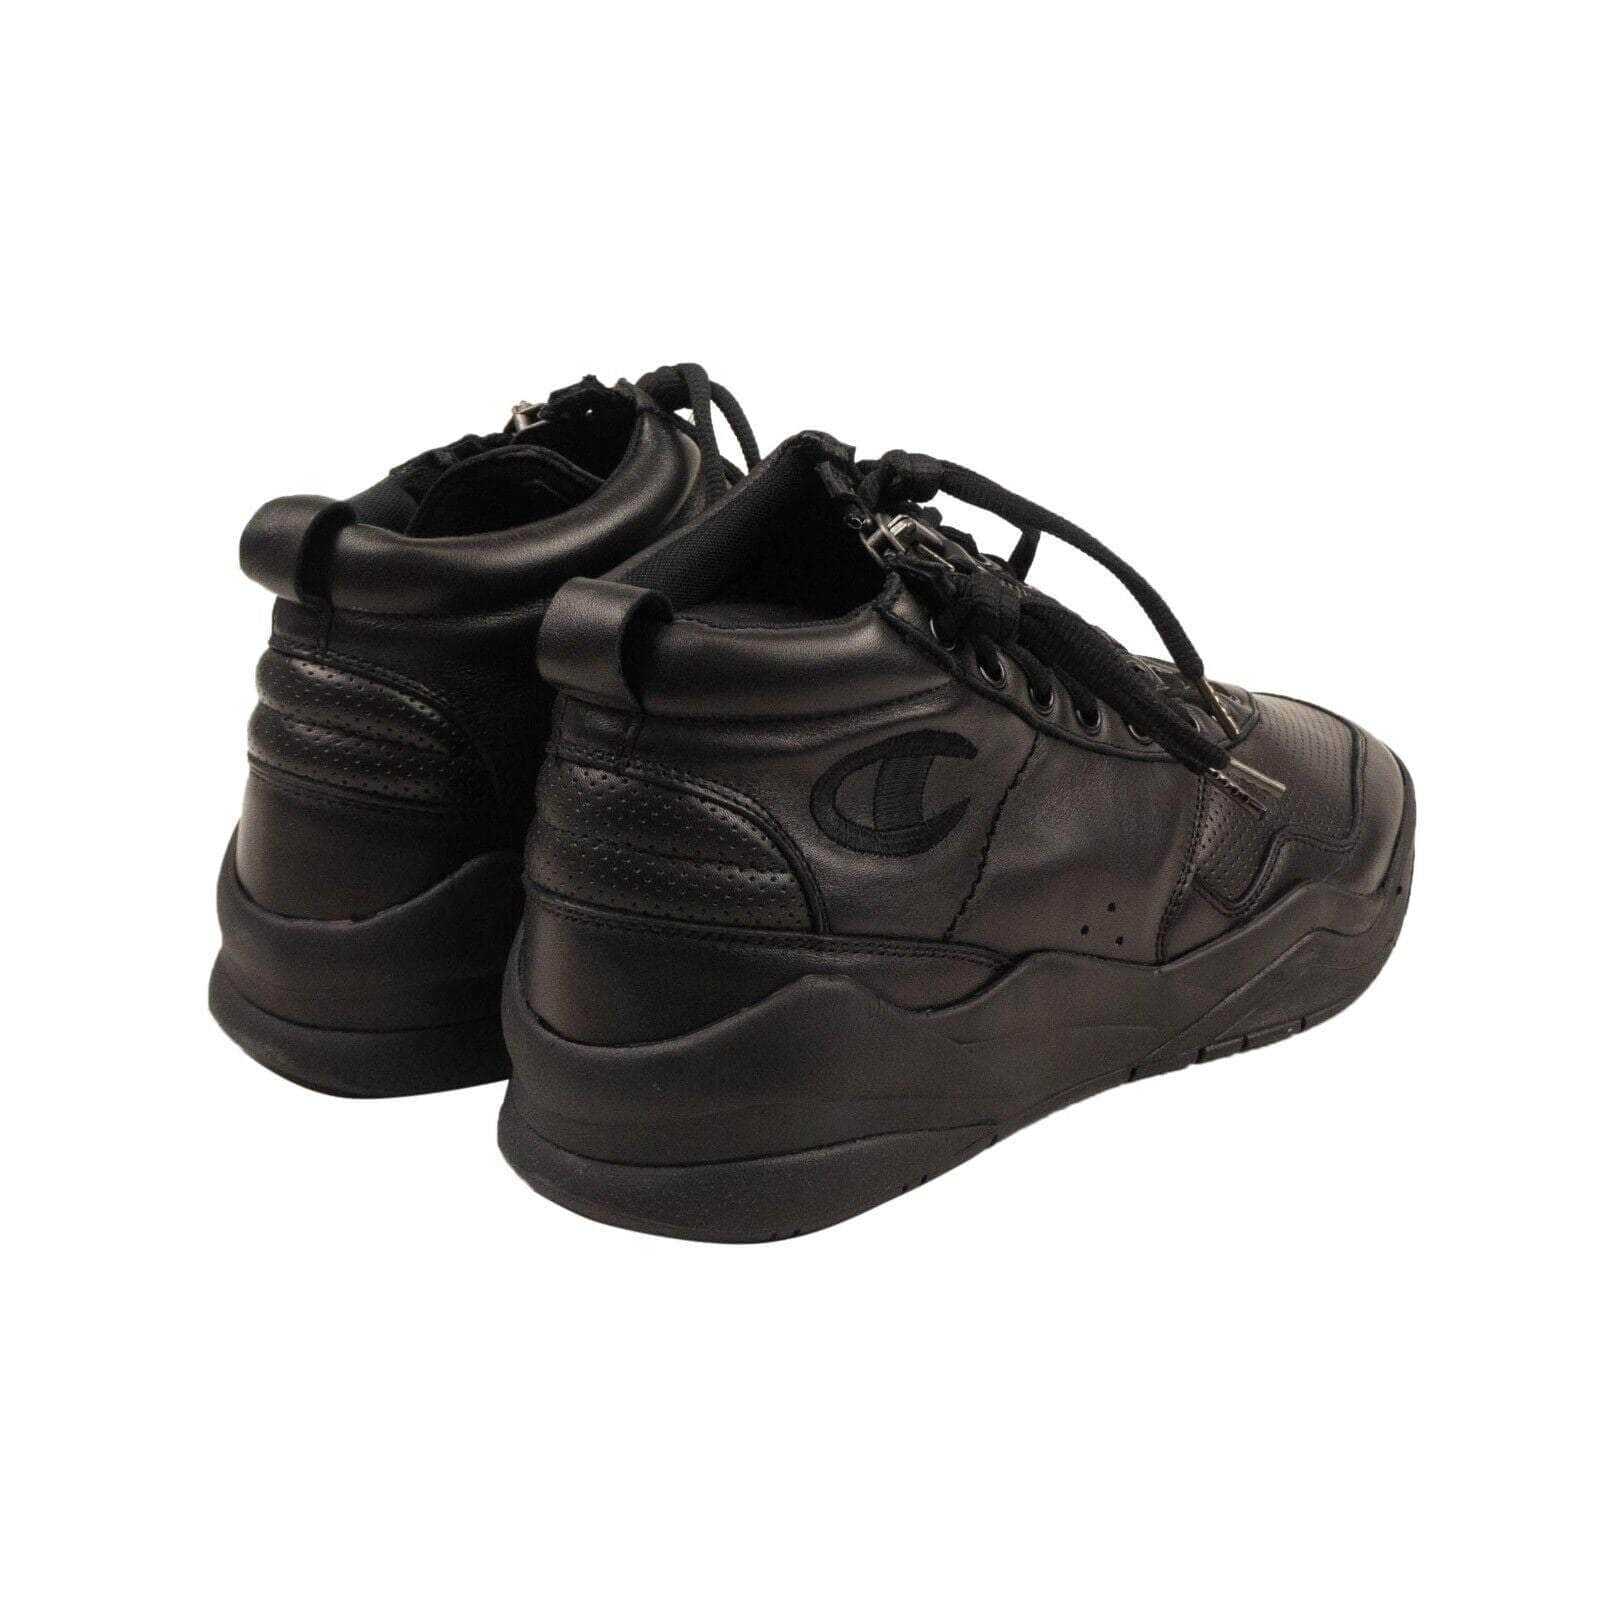 Casbia casbia, channelenable-all, chicmi, couponcollection, gender-mens, main-shoes, mens-shoes, MixedApparel, size-40, size-41, size-42, size-43, size-44, size-46, size-47, under-250 Black Leather AWOL Atlanta Sneakers